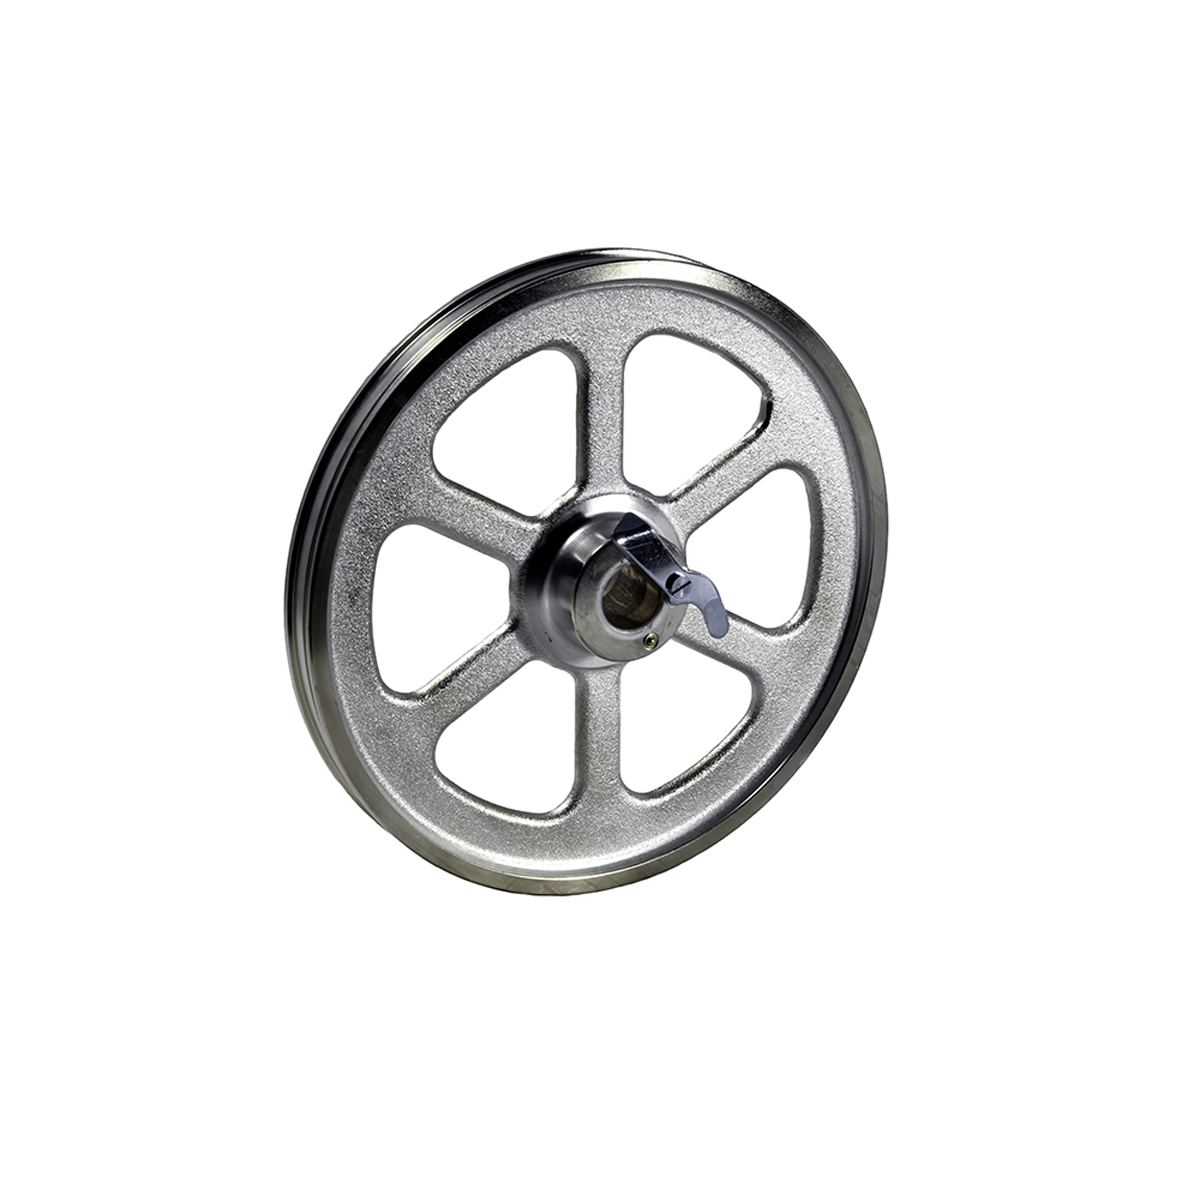 Hobart Equivalent Lower Wheel 14" for Band Saw 6614